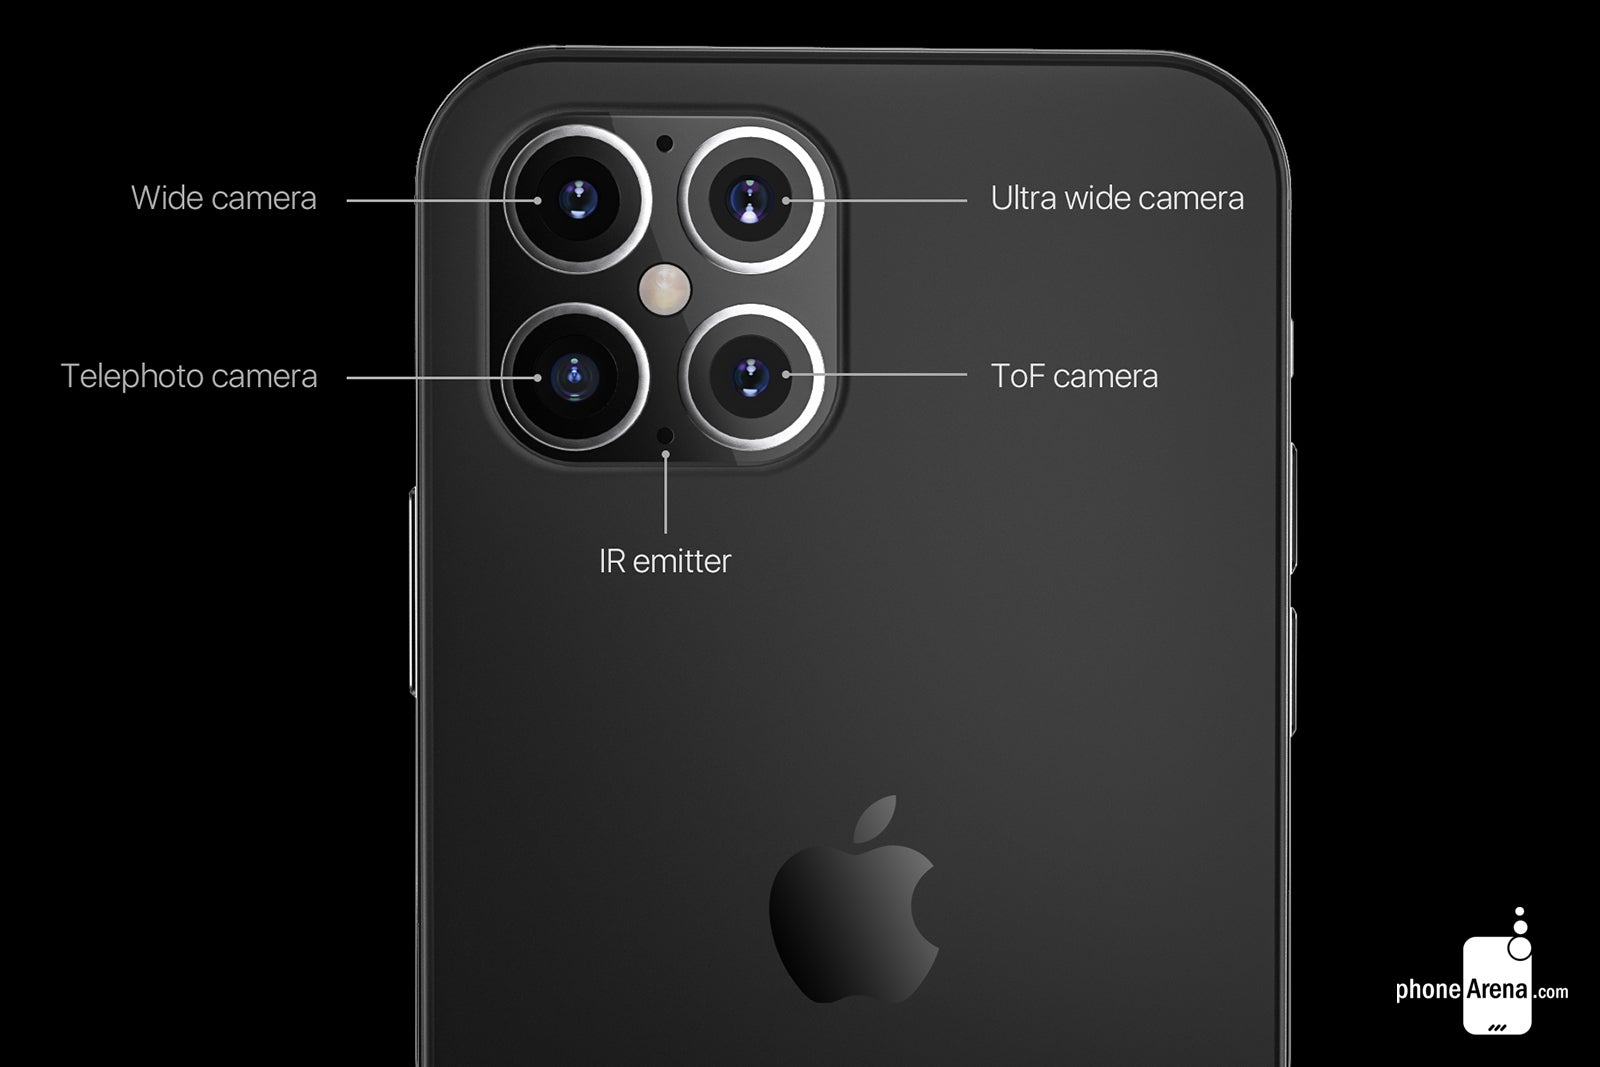 Render of the rear camera setup for the iPhone 12 Pro - UBS says Apple iPhone 12 Pro models will get a 50% boost in memory